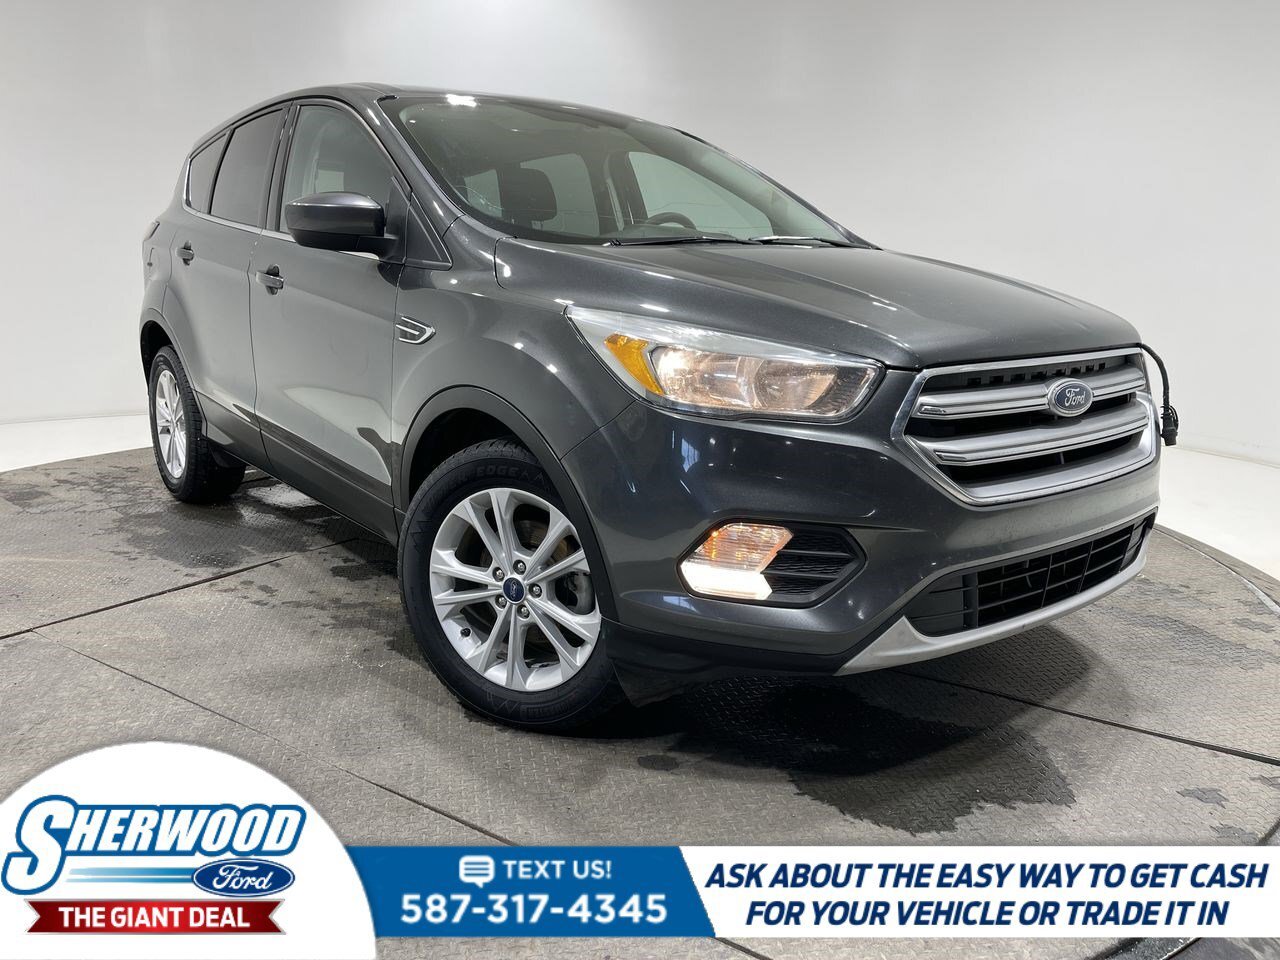 2017 Ford Escape SE- $0 Down $78 Weekly - NEW BRAKES & TIRES